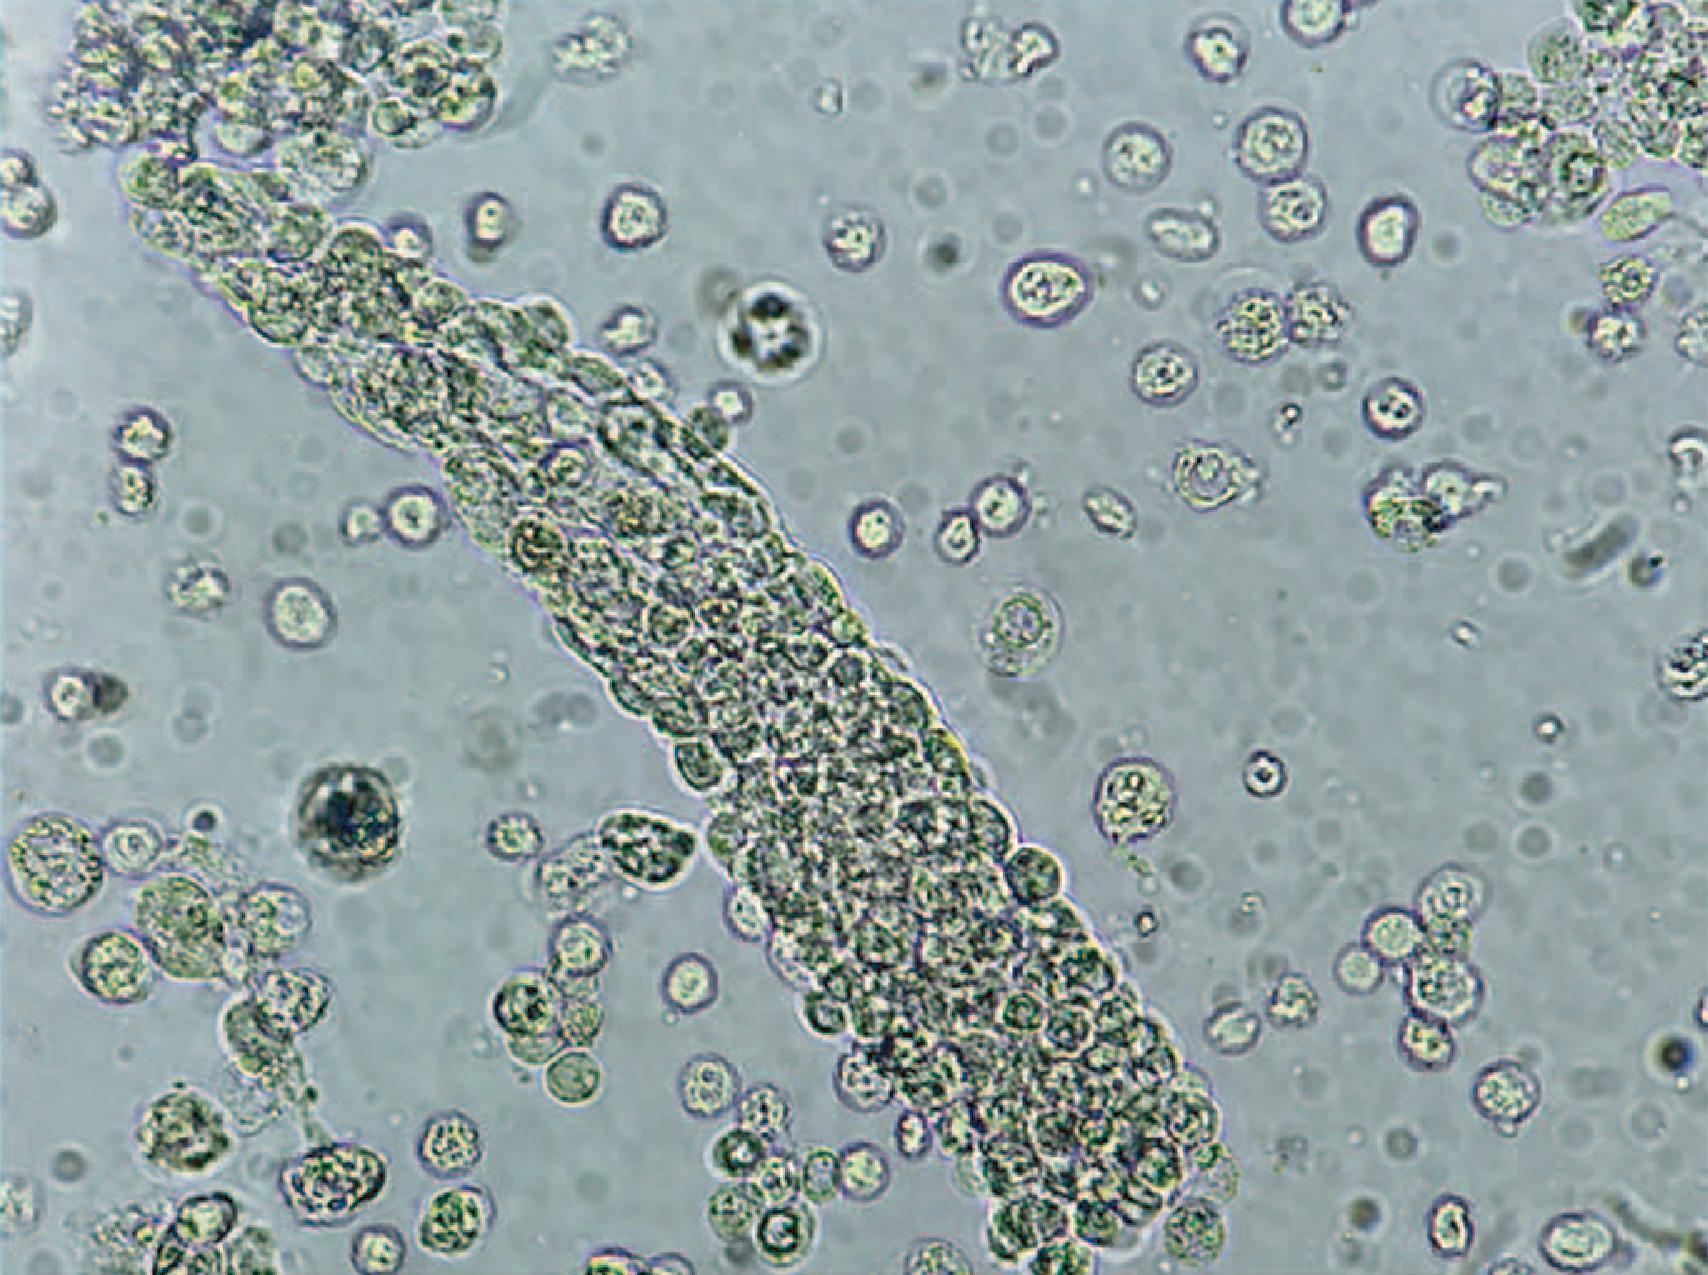 Fig. 33.1, Urine microscopy showing a white blood cell cast and surrounding white blood cells (× 60).